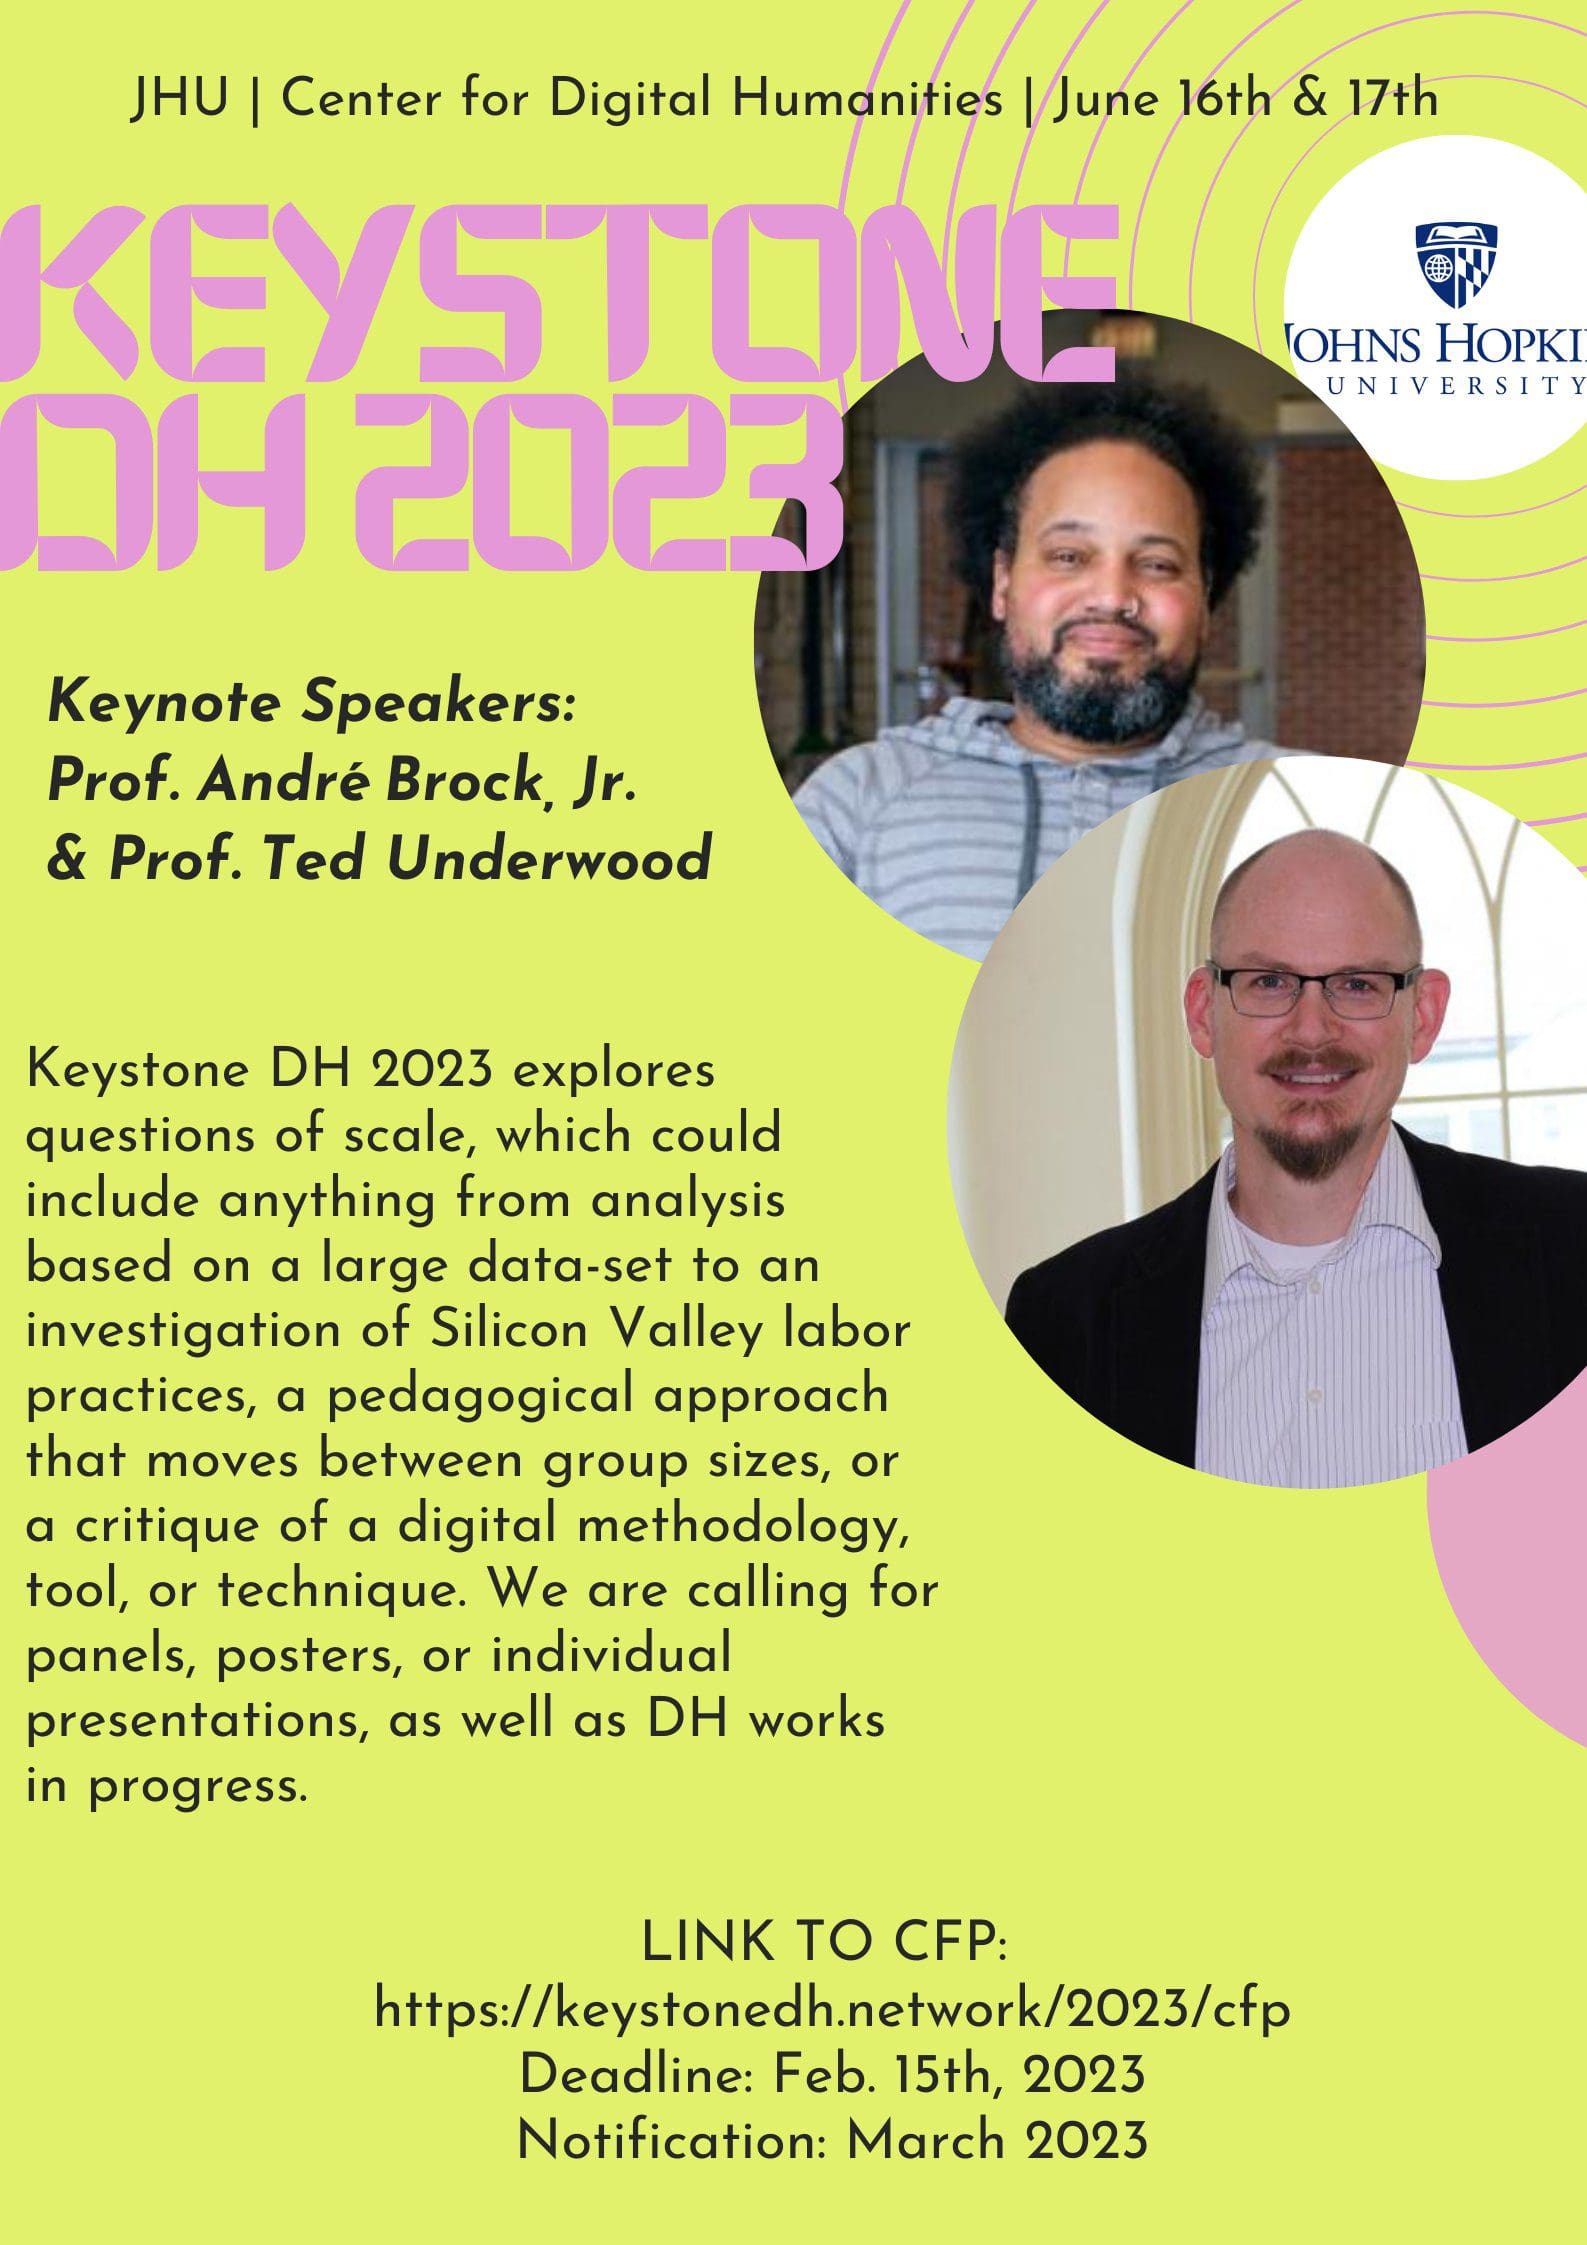 Keystone DH 2023 poster, featuring text about the conference and headshots for Professors Andre Block and Ted Underwood.